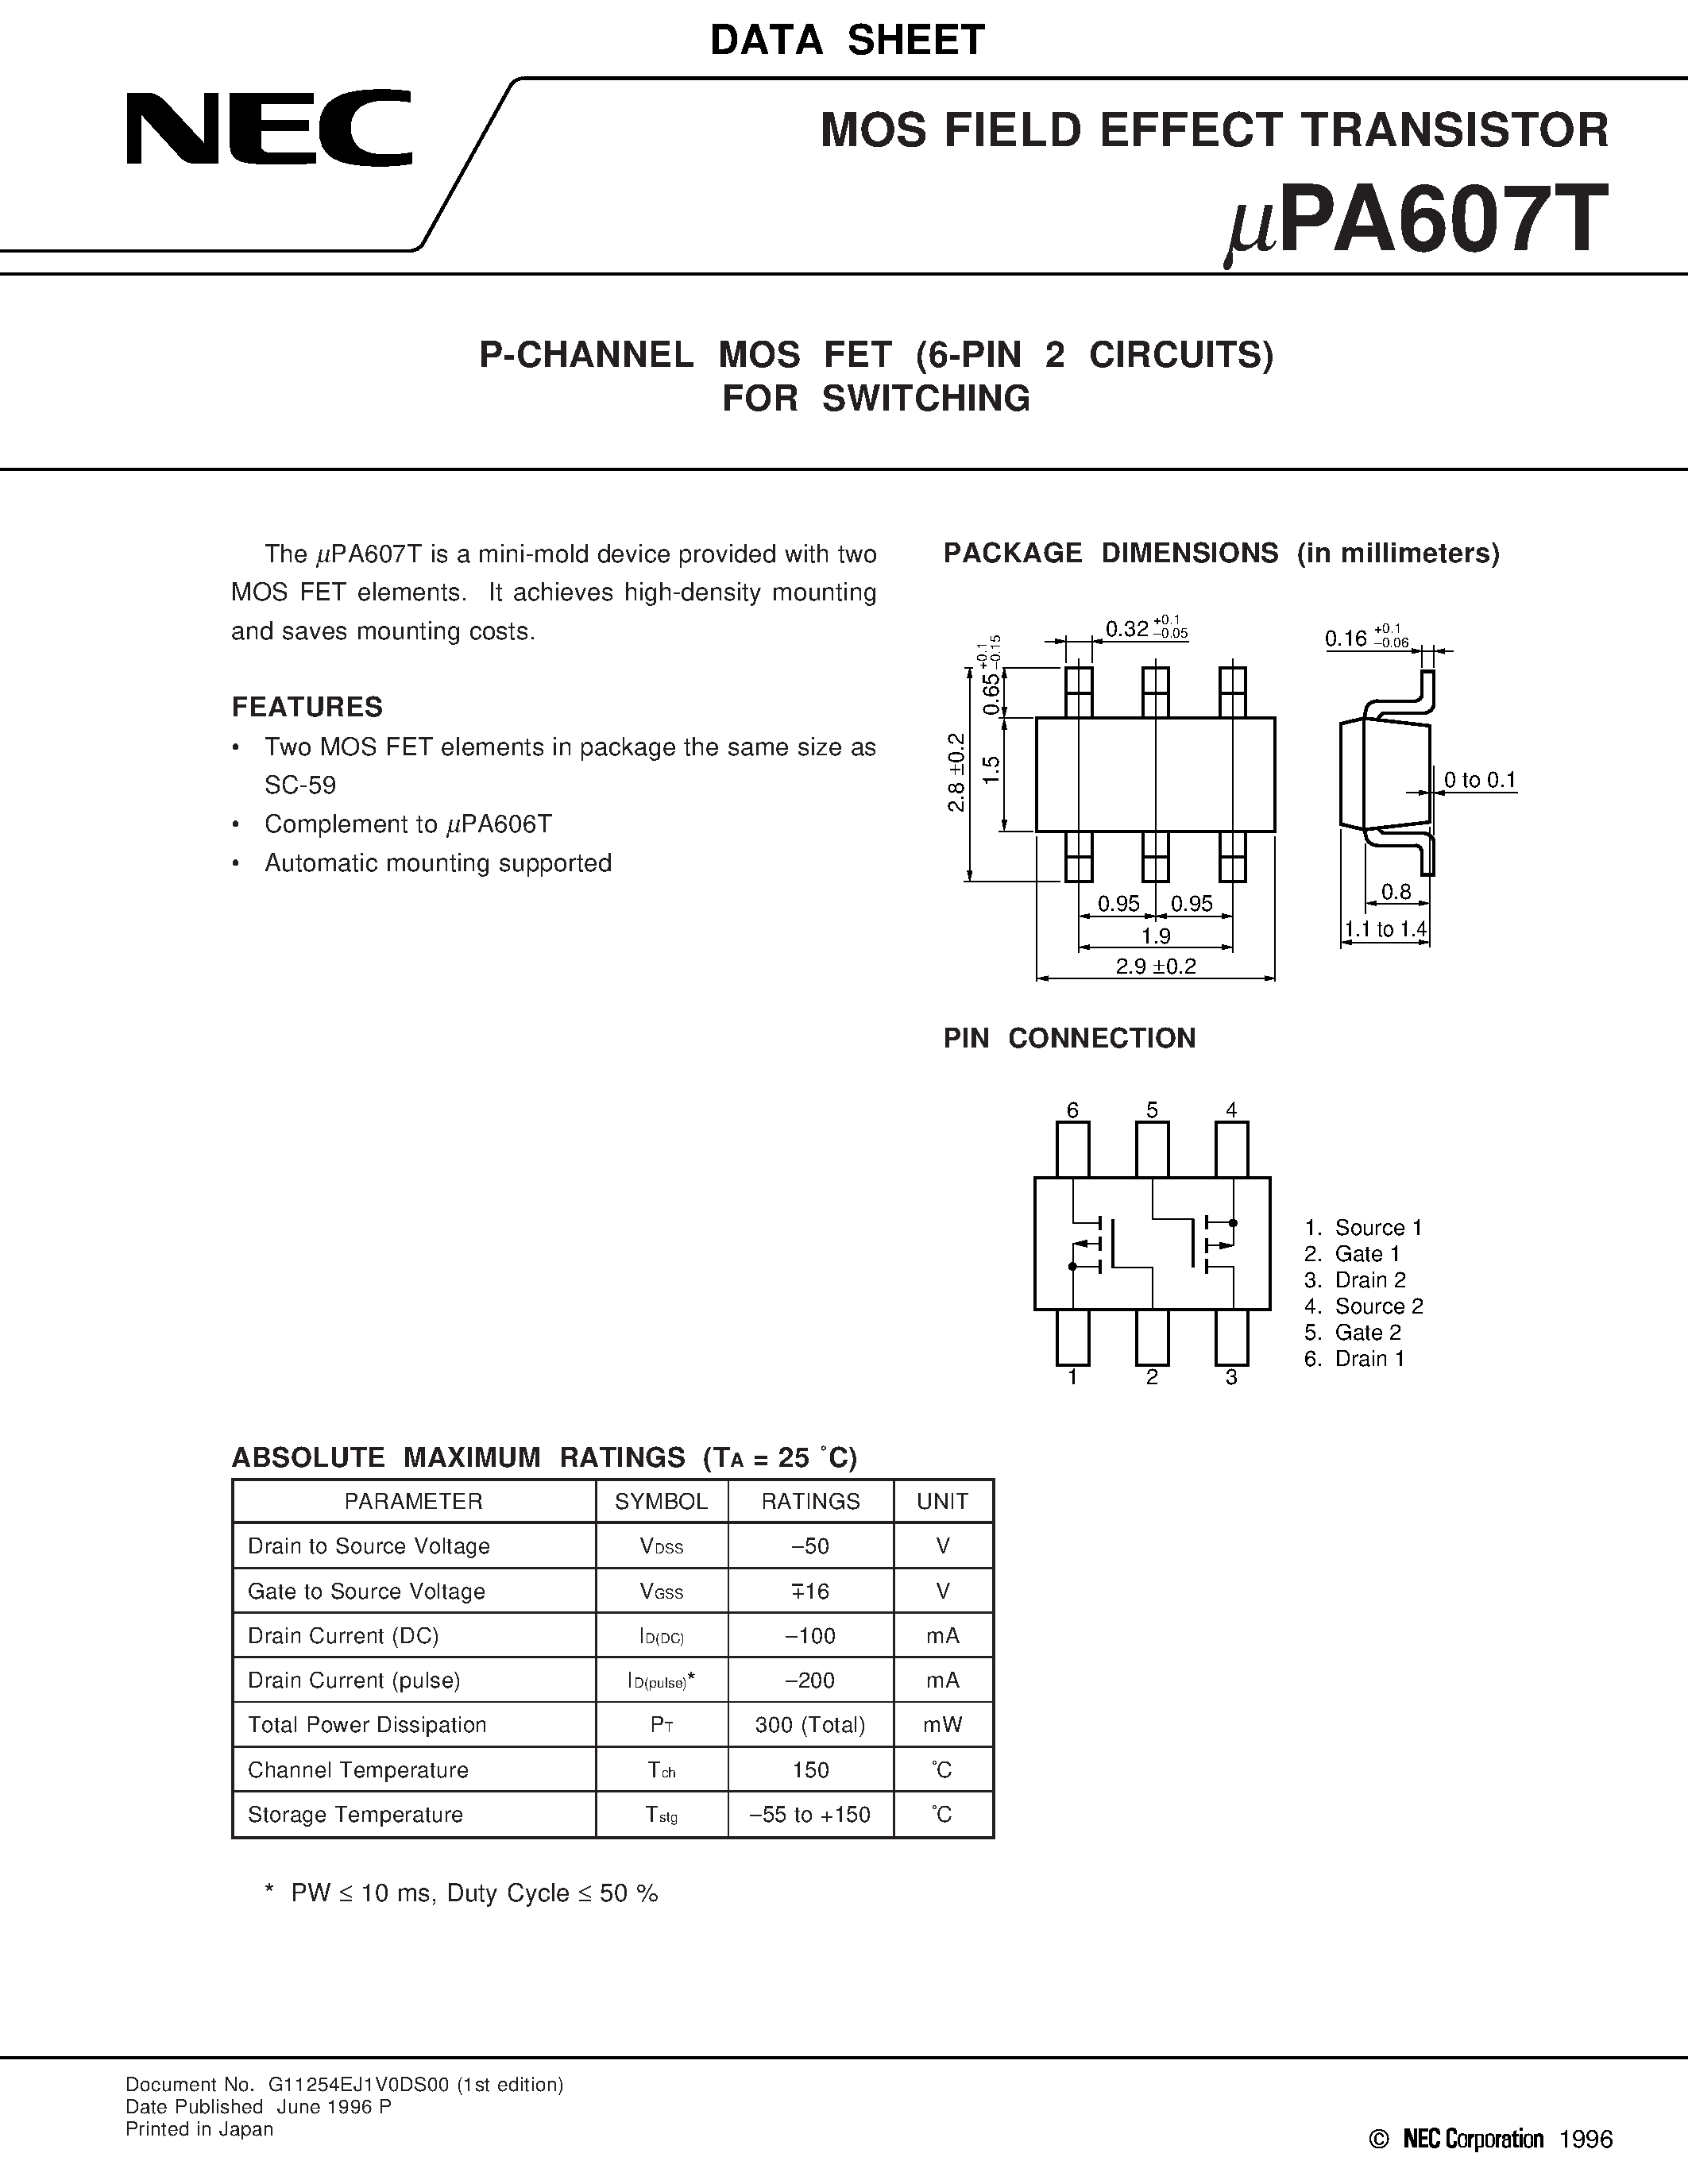 Datasheet UPA607 - P-CHANNEL MOS FET 6-PIN 2 CIRCUITS FOR SWITCHING page 1